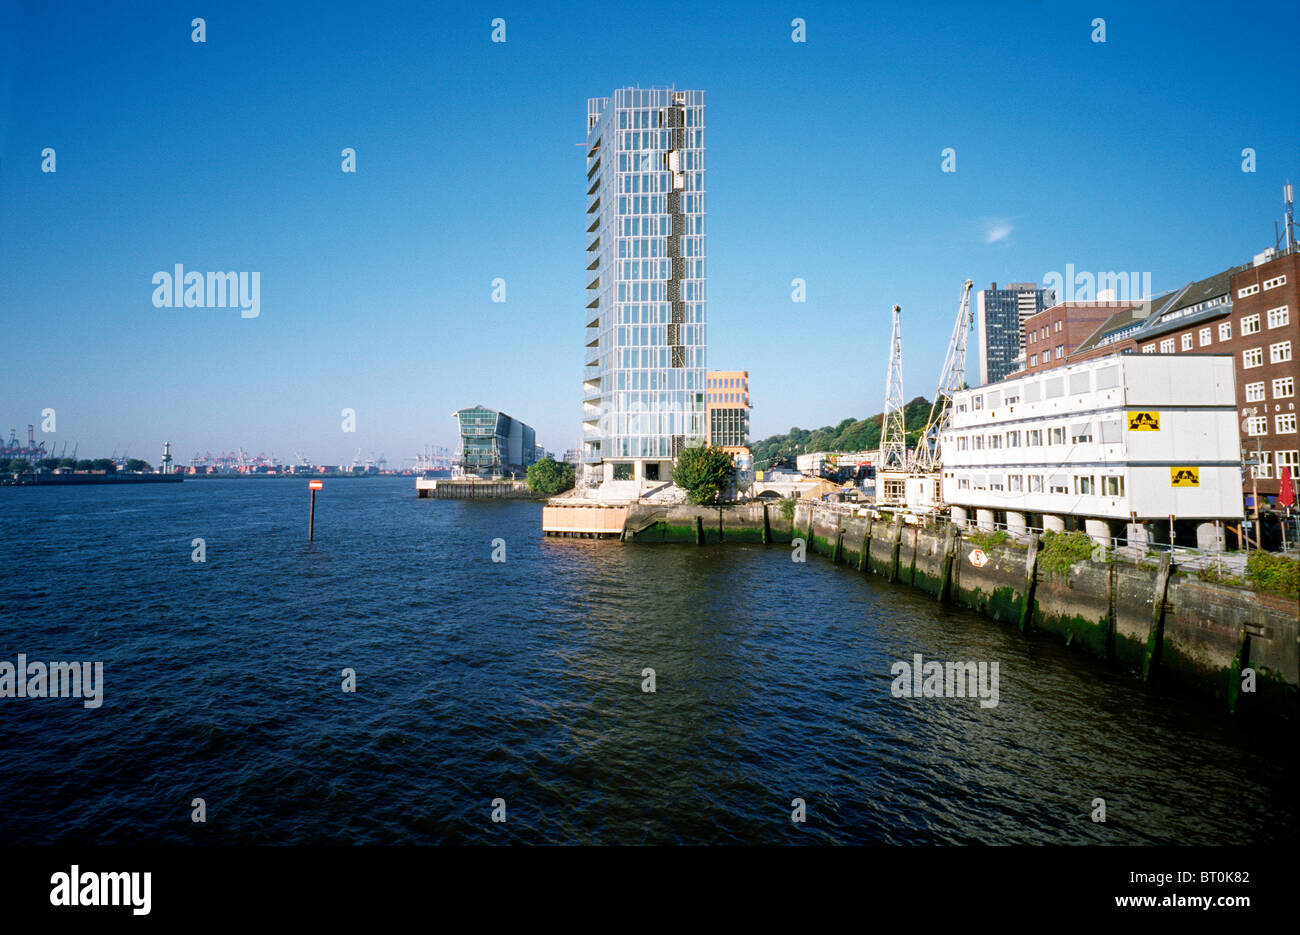 The Kristall Tower - riverside property development as part of the so called Perlenkette on the river Elbe in Altona district. Stock Photo